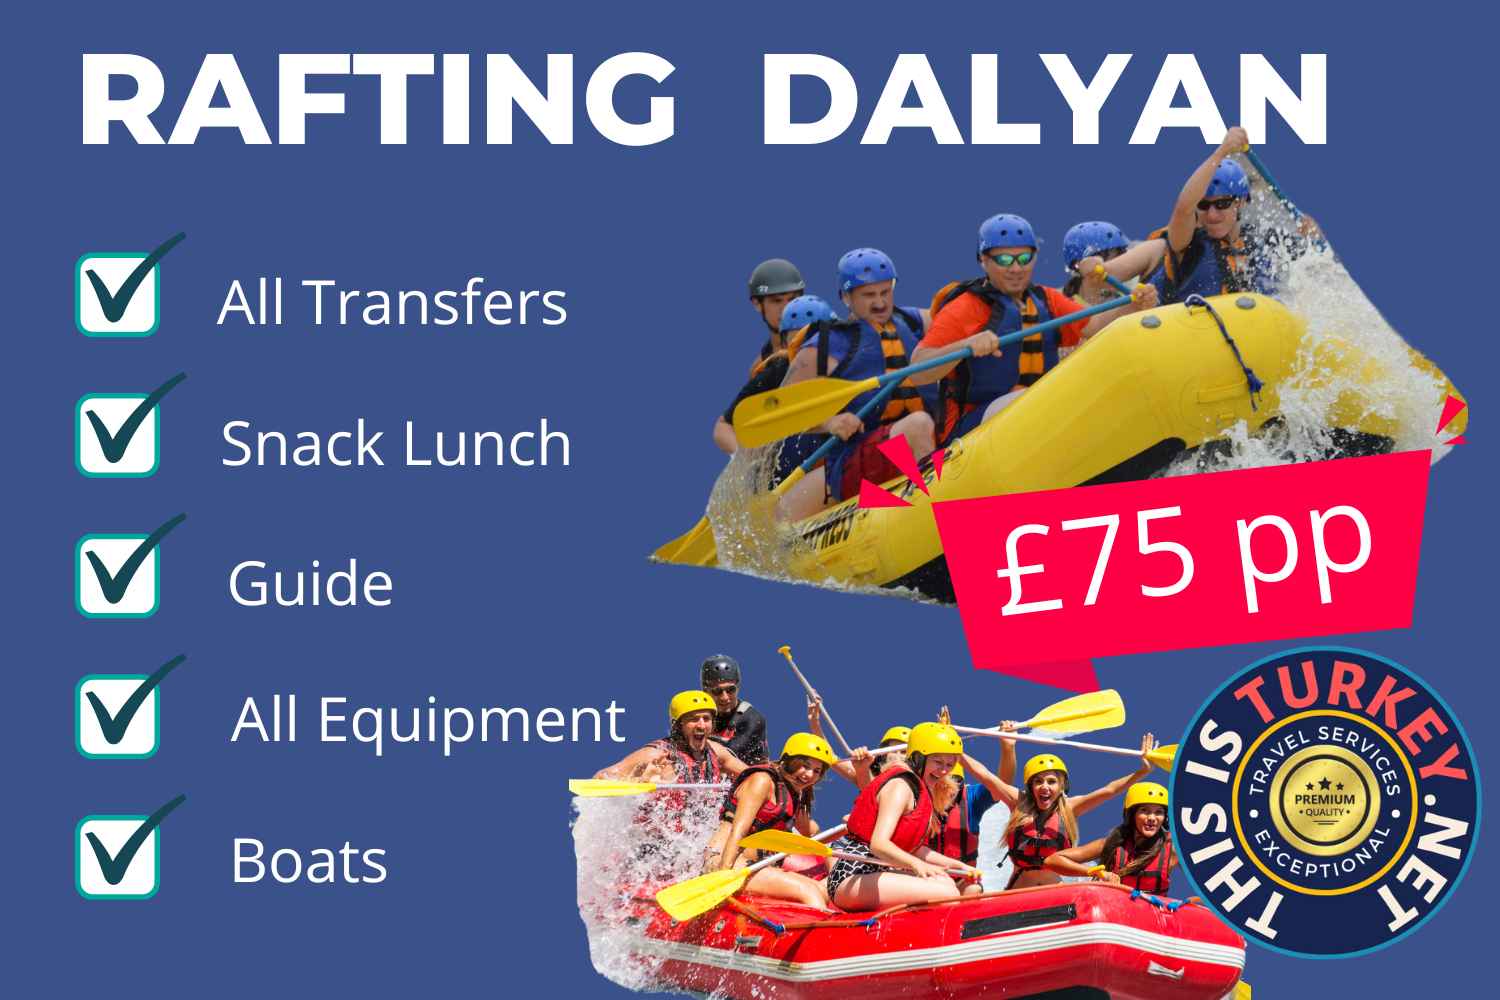 Dalyan excursions and activities, things to do. Rafting , pick up and return transfers are included.